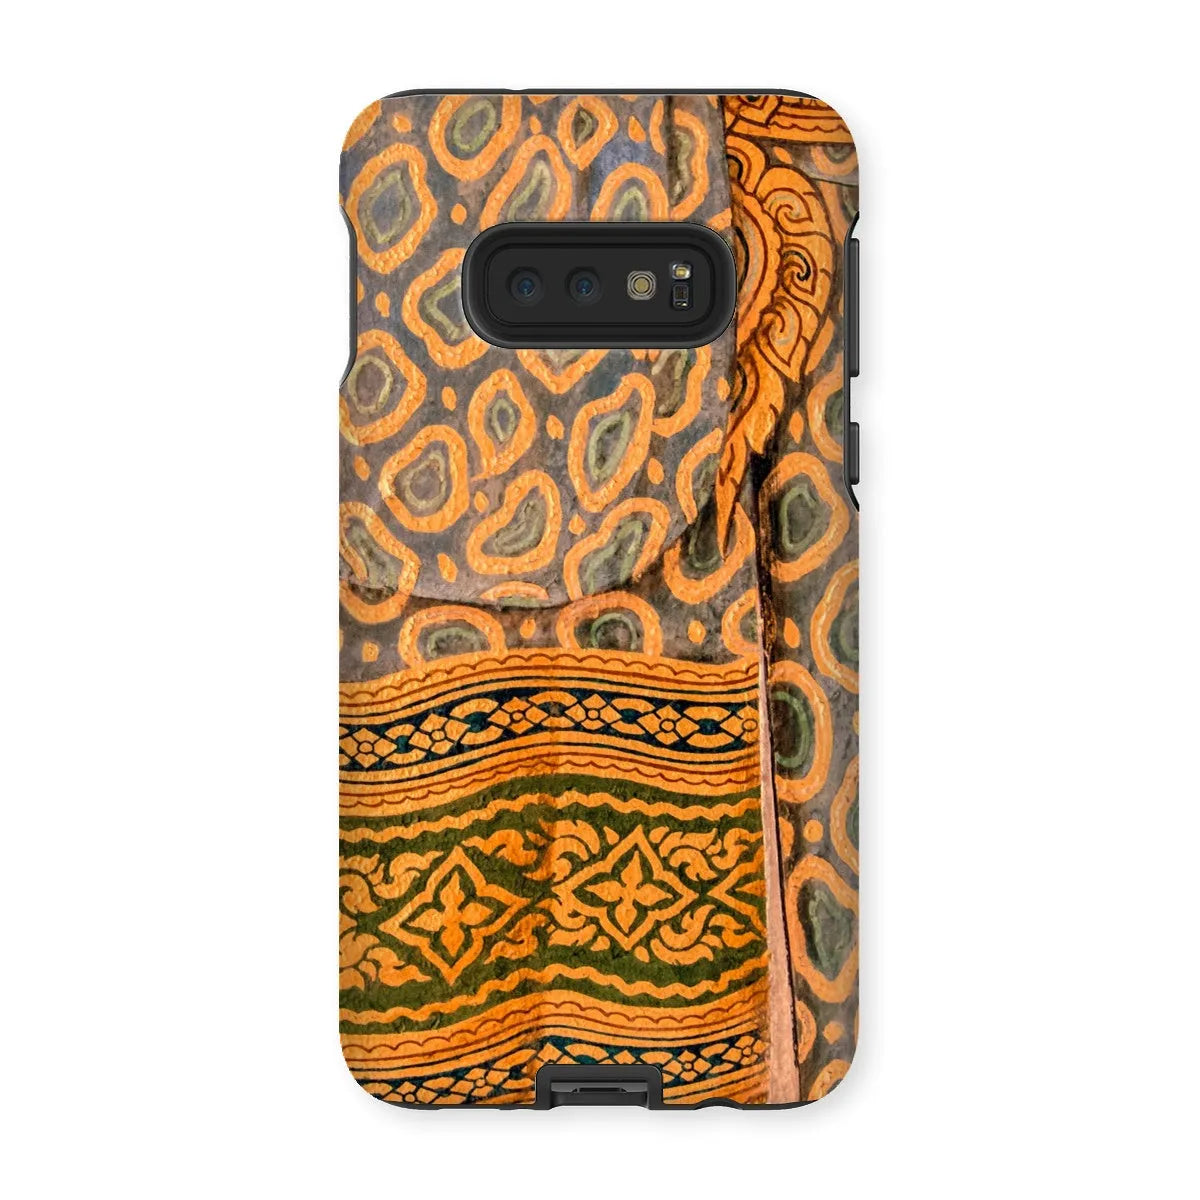 Lady In Waiting - Royal Siam Mural Art Phone Case - Samsung Galaxy S10e / Matte - Mobile Phone Cases - Aesthetic Art